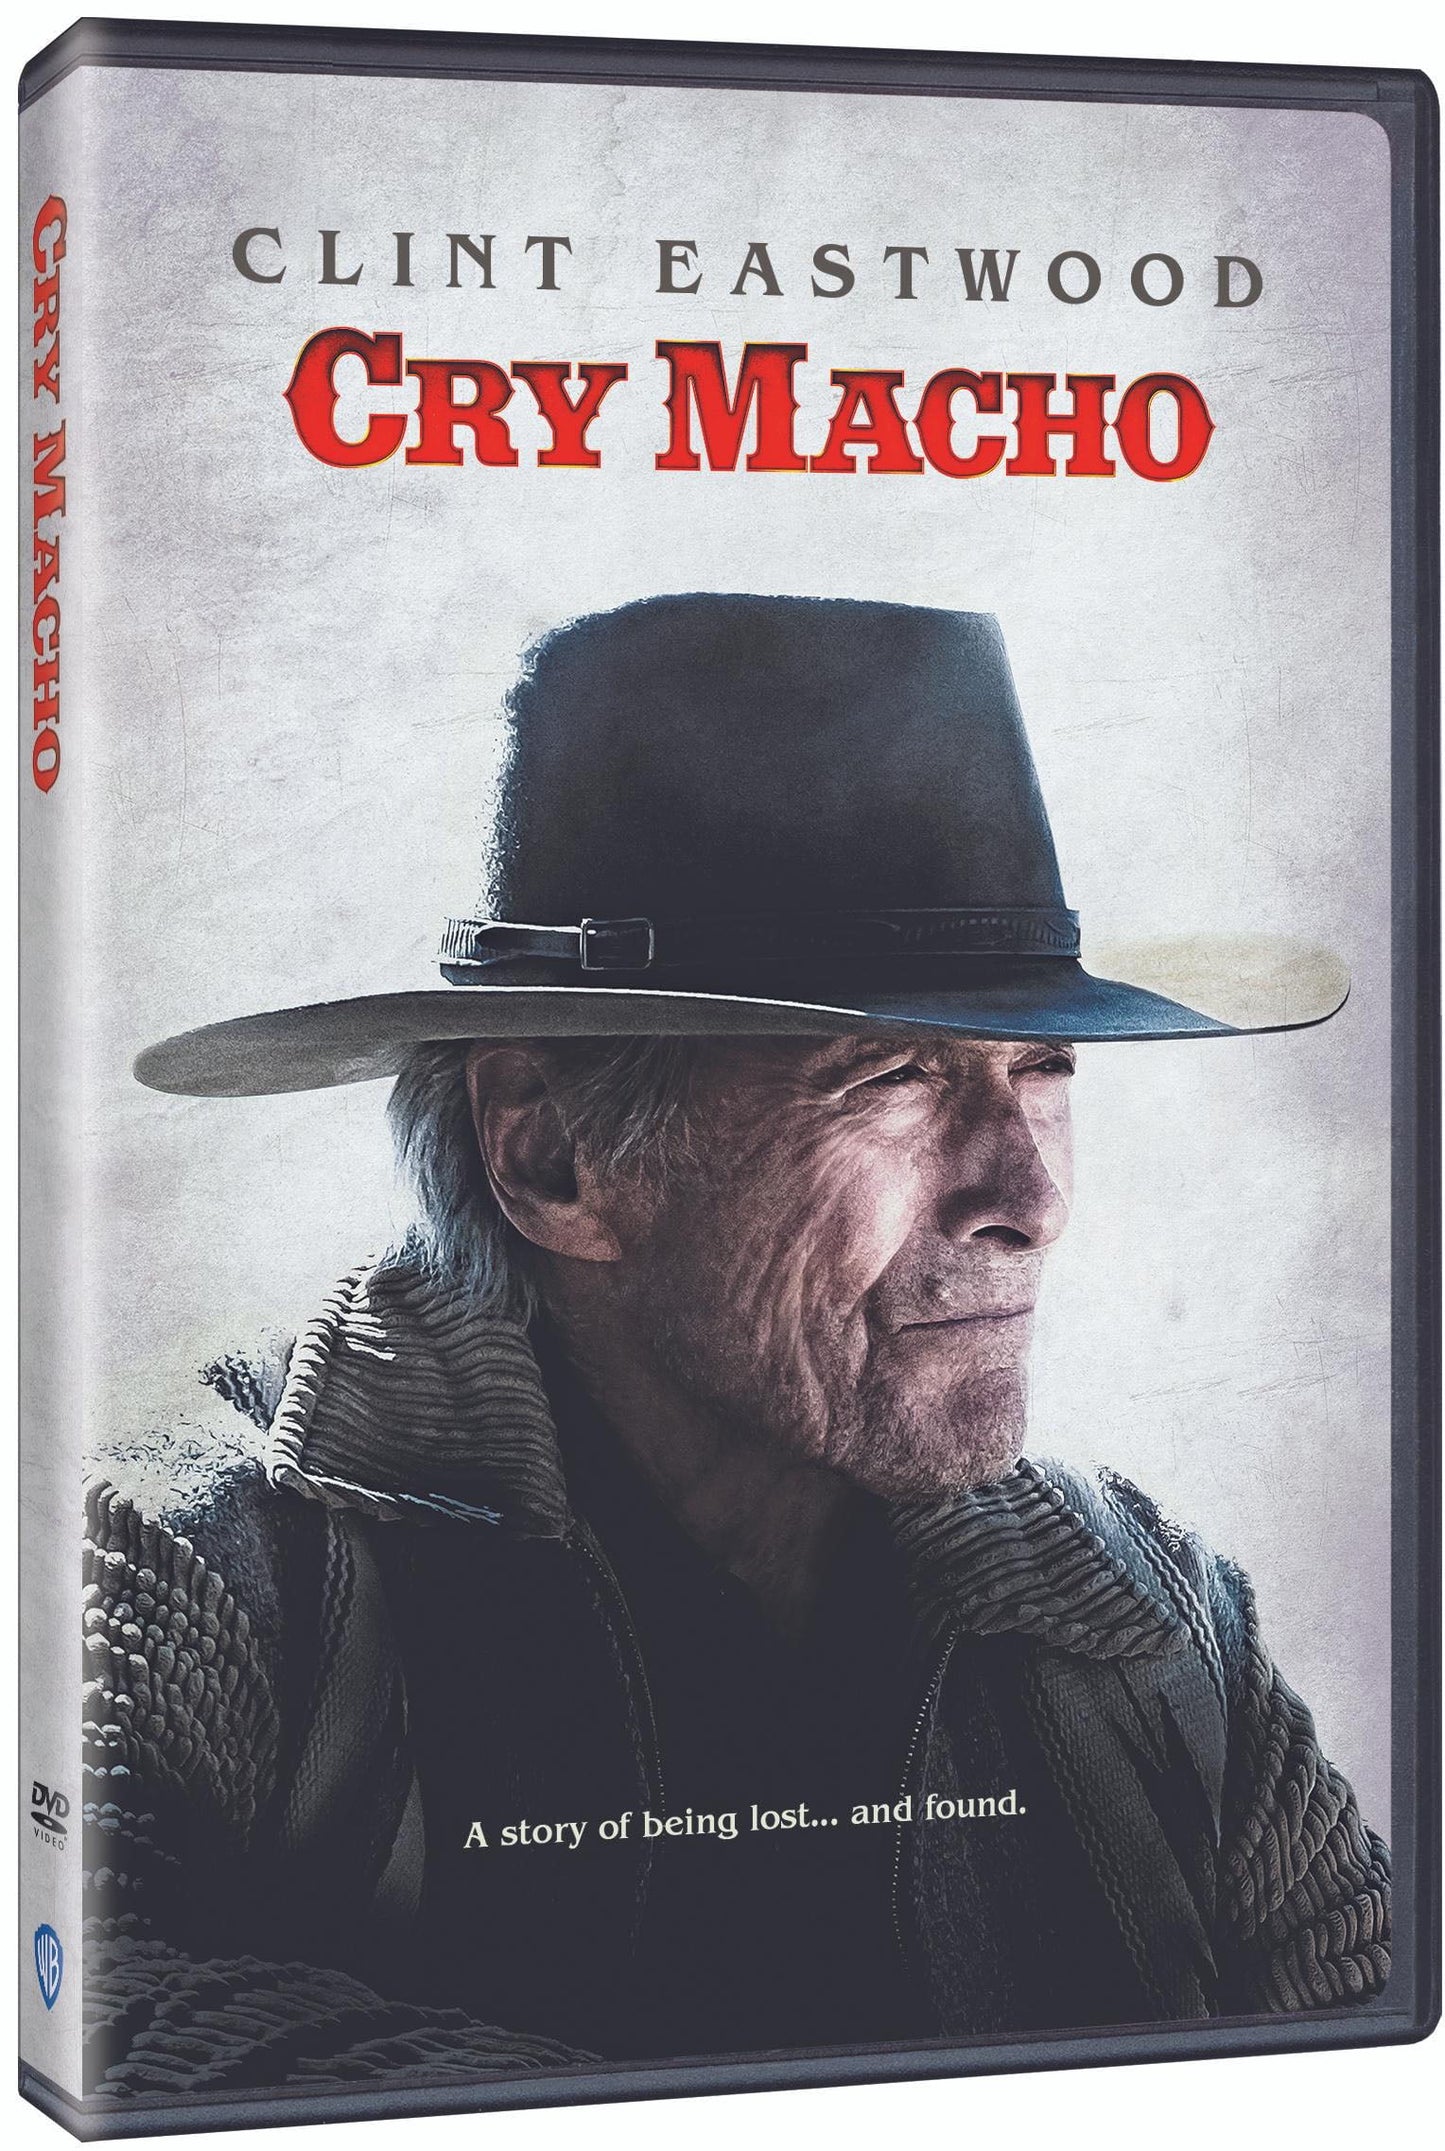 Cry Macho || Clint Eastwood – 2021 DVD+DC || Best in New Western Films